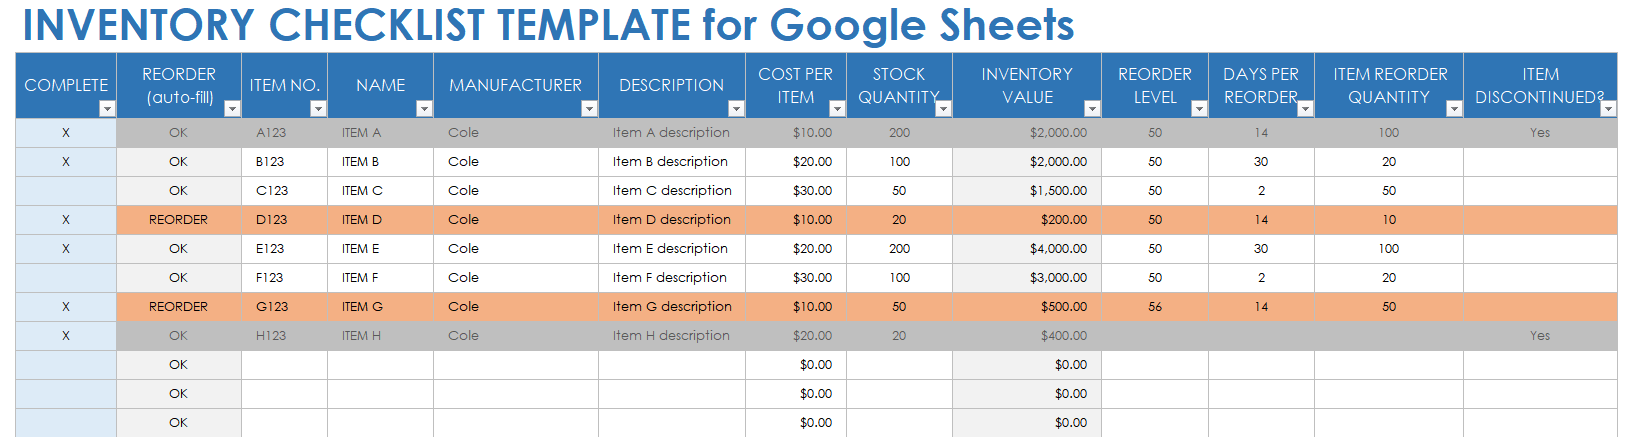 Inventory Checklist Template for Google Sheets